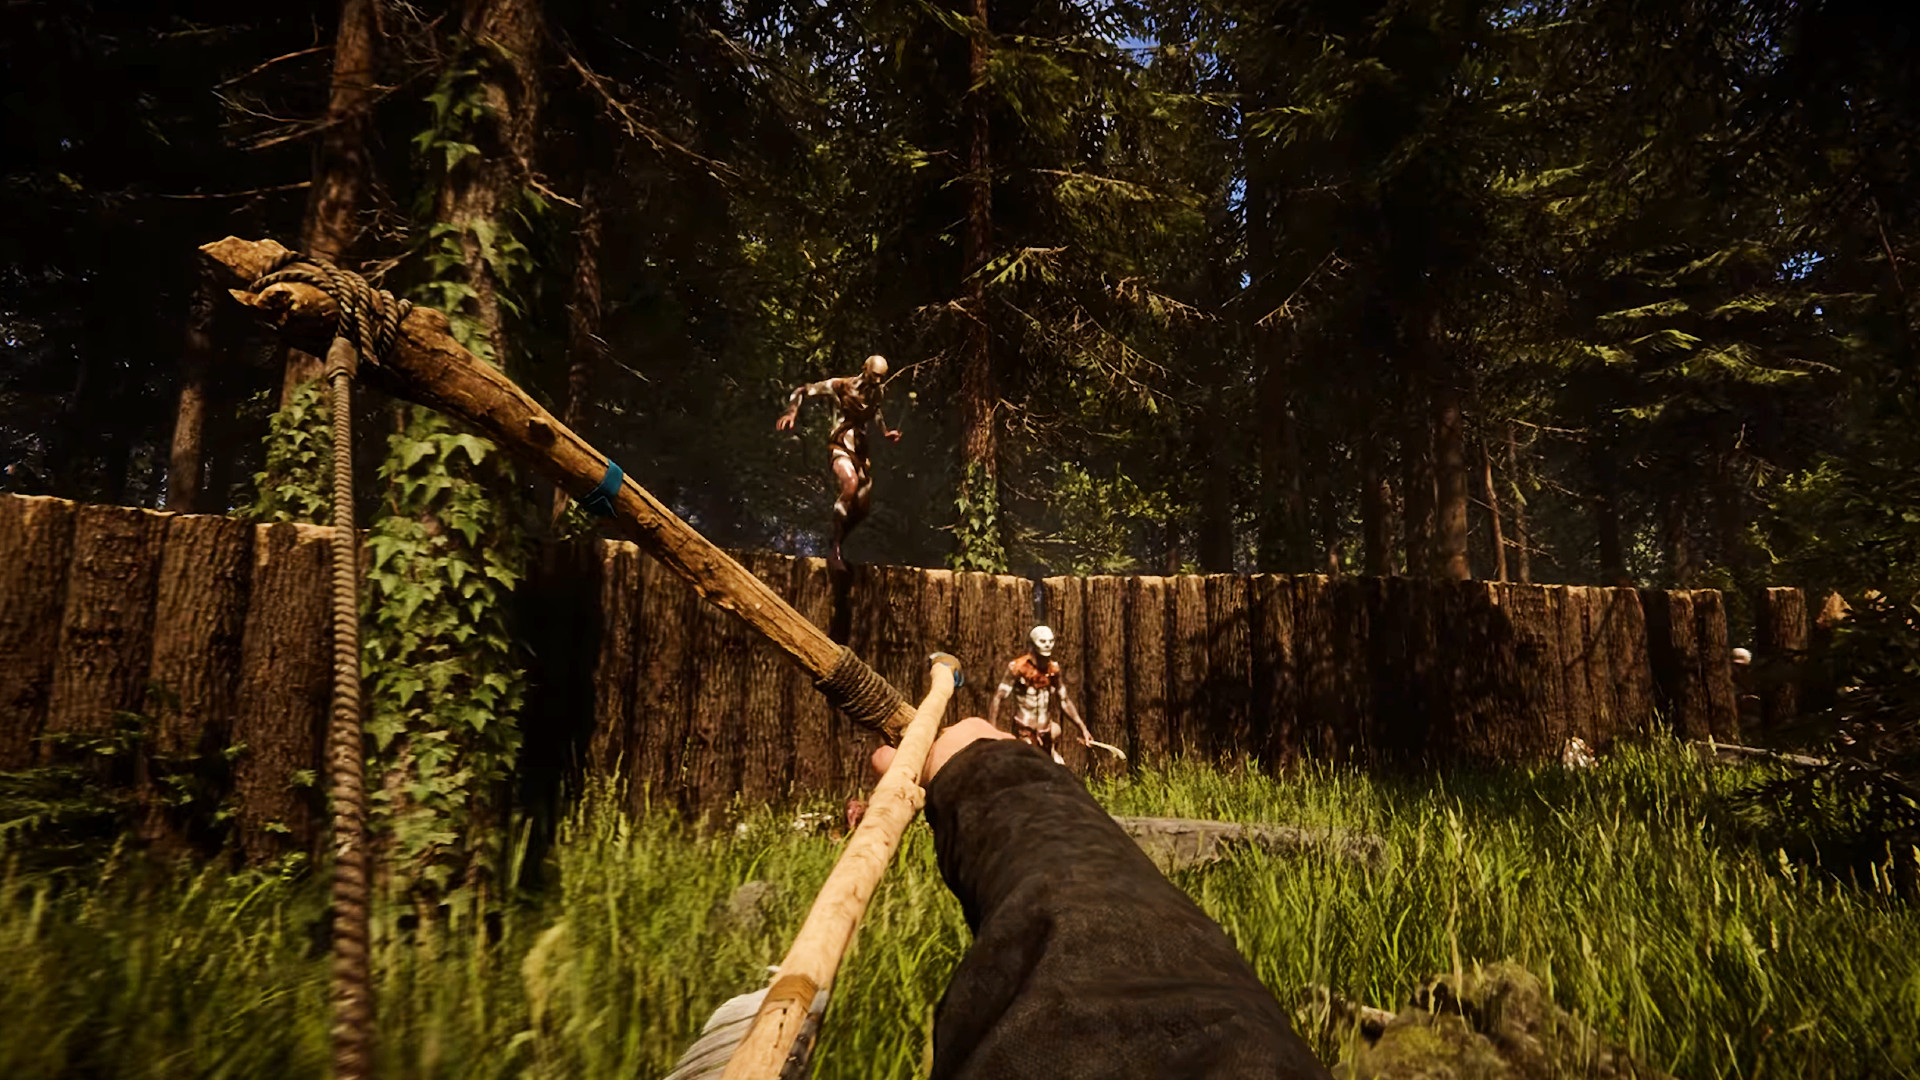 Sons of the Forest release leads to 149% player spike for PS4